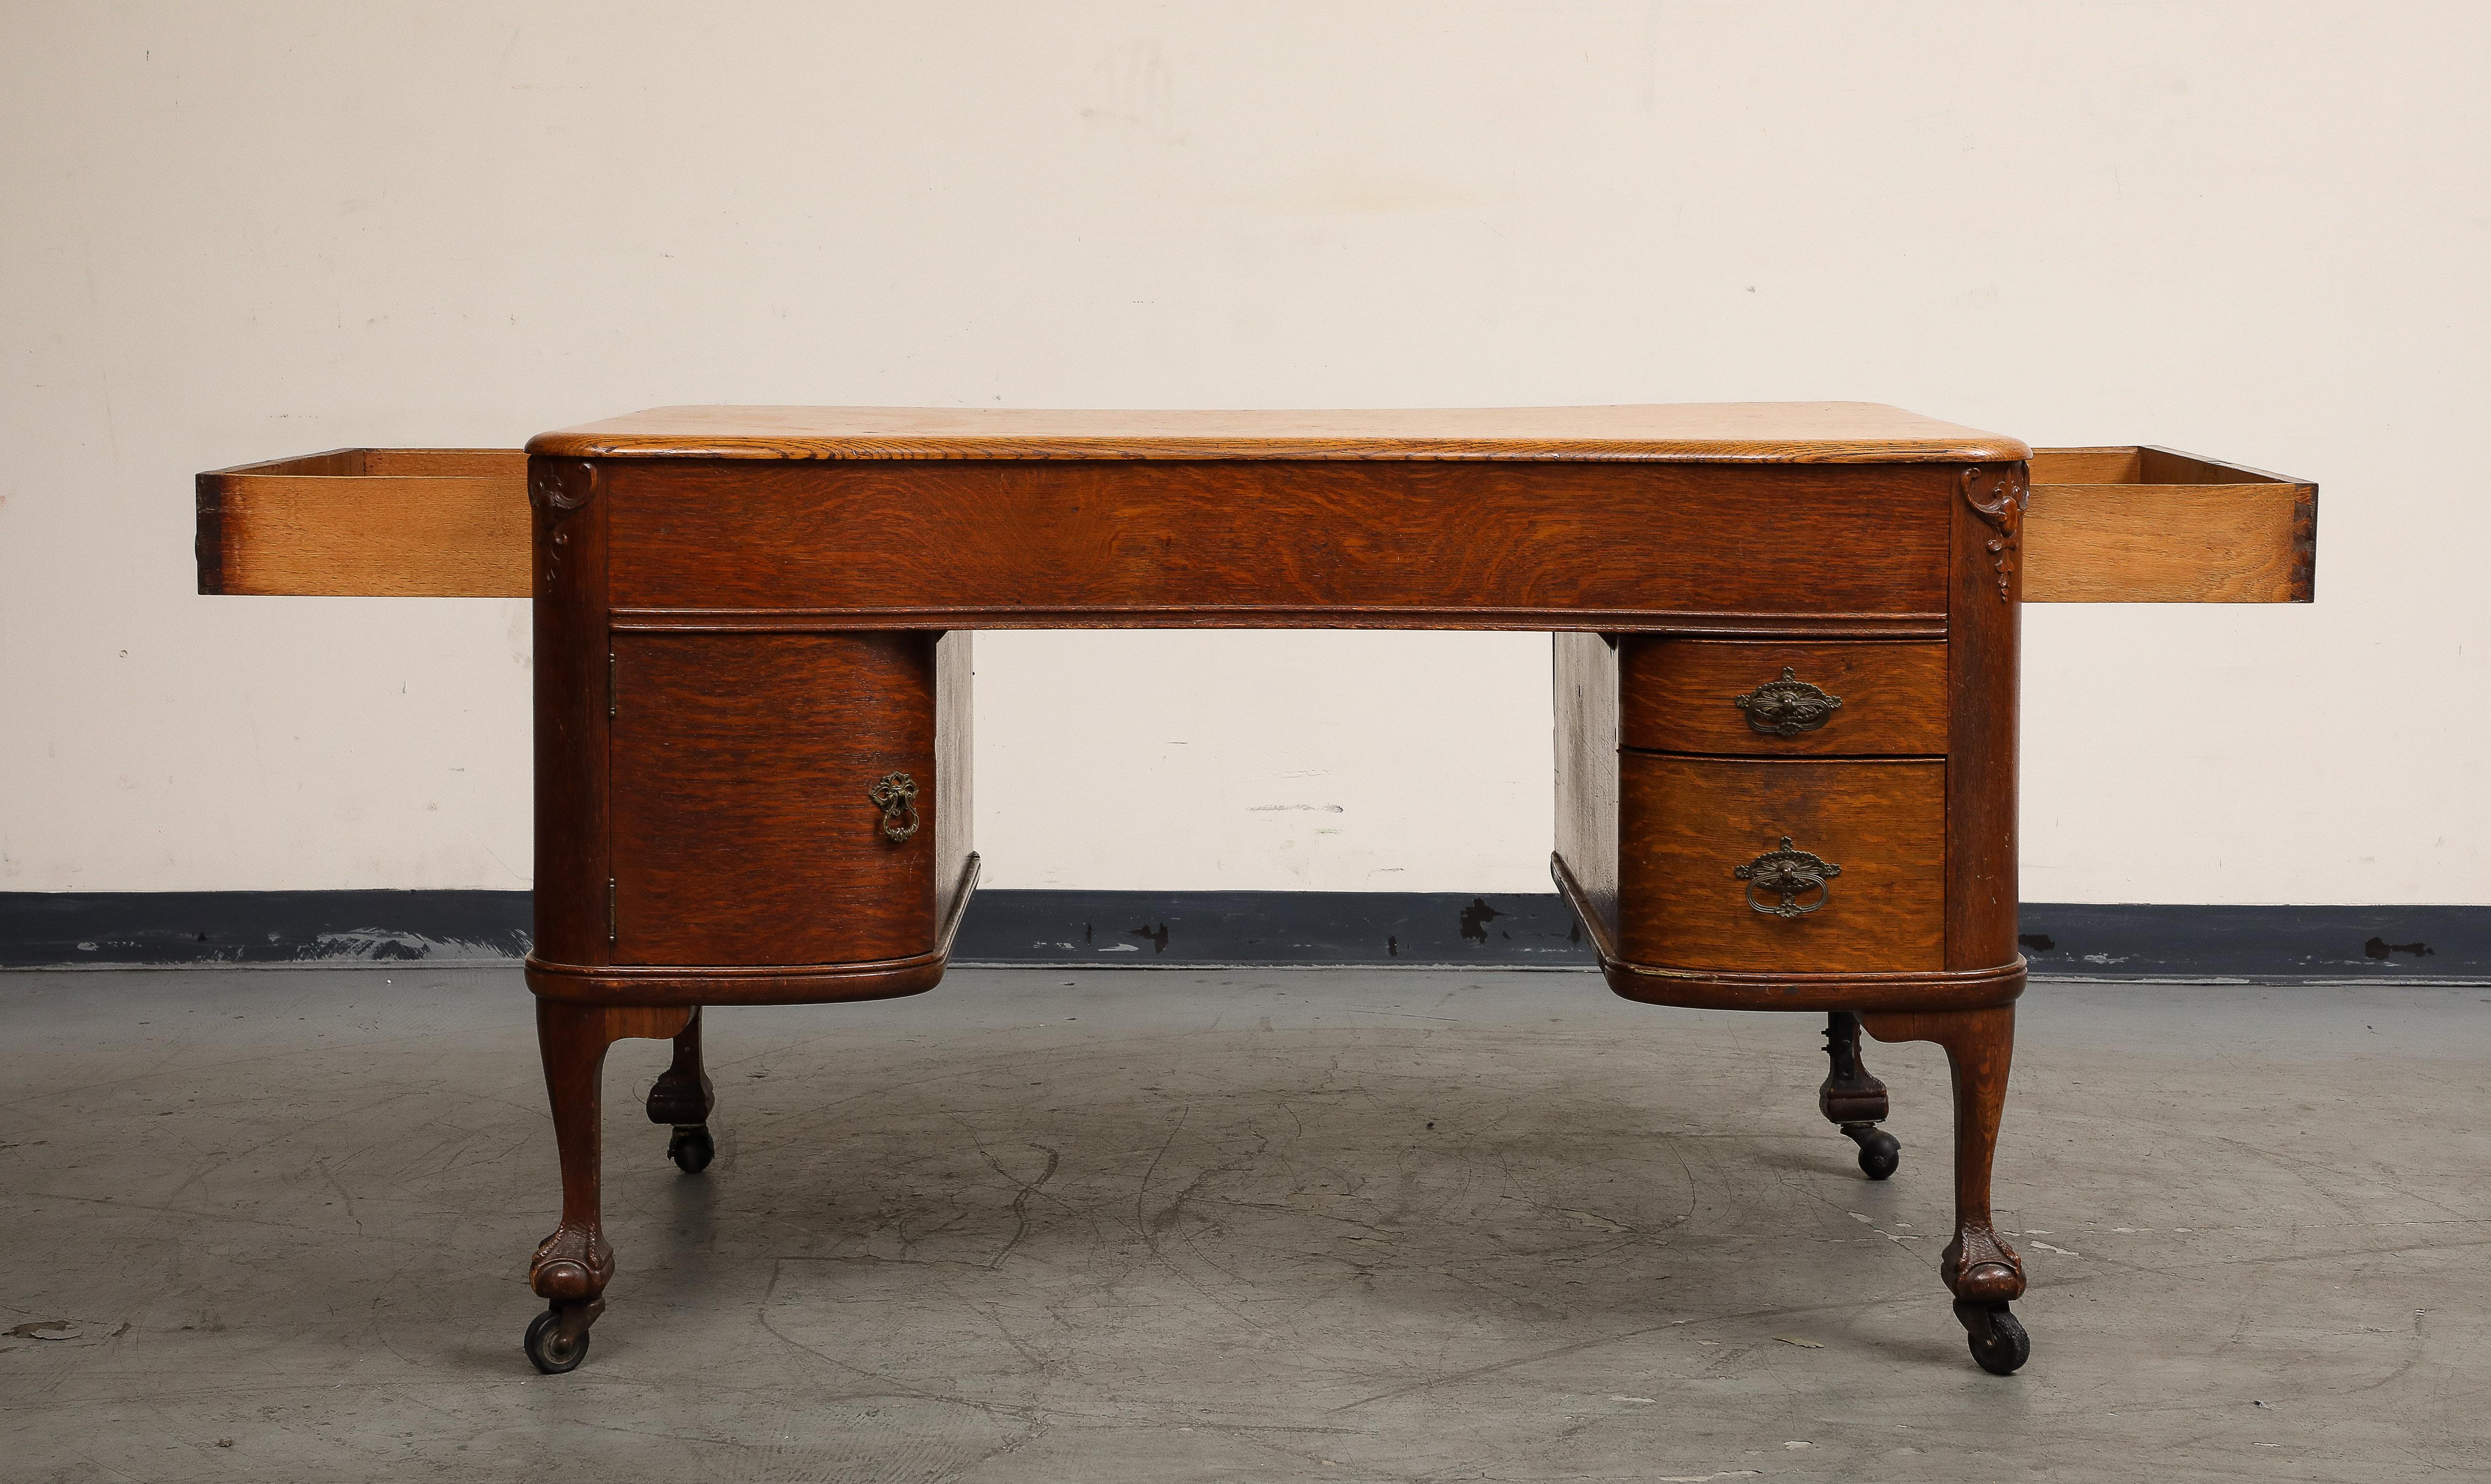 English Regency style mahogany partners desk, circa 1930. The top curves inward on each side for two to comfortably share the top. Each side features two drawers and a cabinet, with additional drawers on either end of the desk, all with original